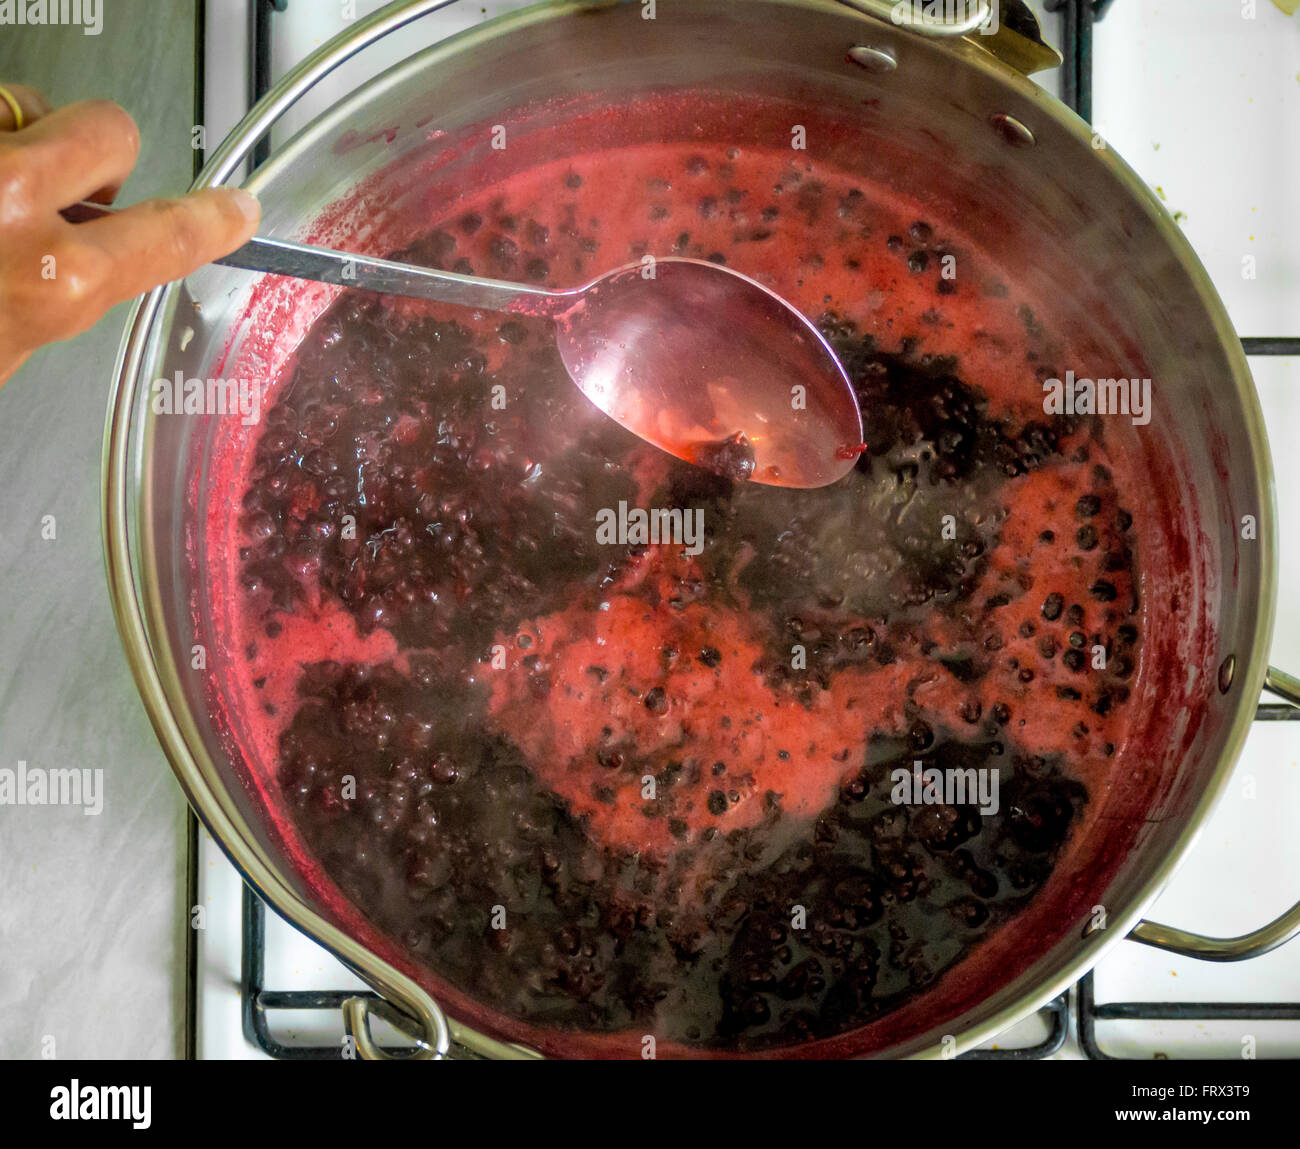 Jam Making at home - Blackcurrants in large Maslin Pan boiling on stove Stock Photo